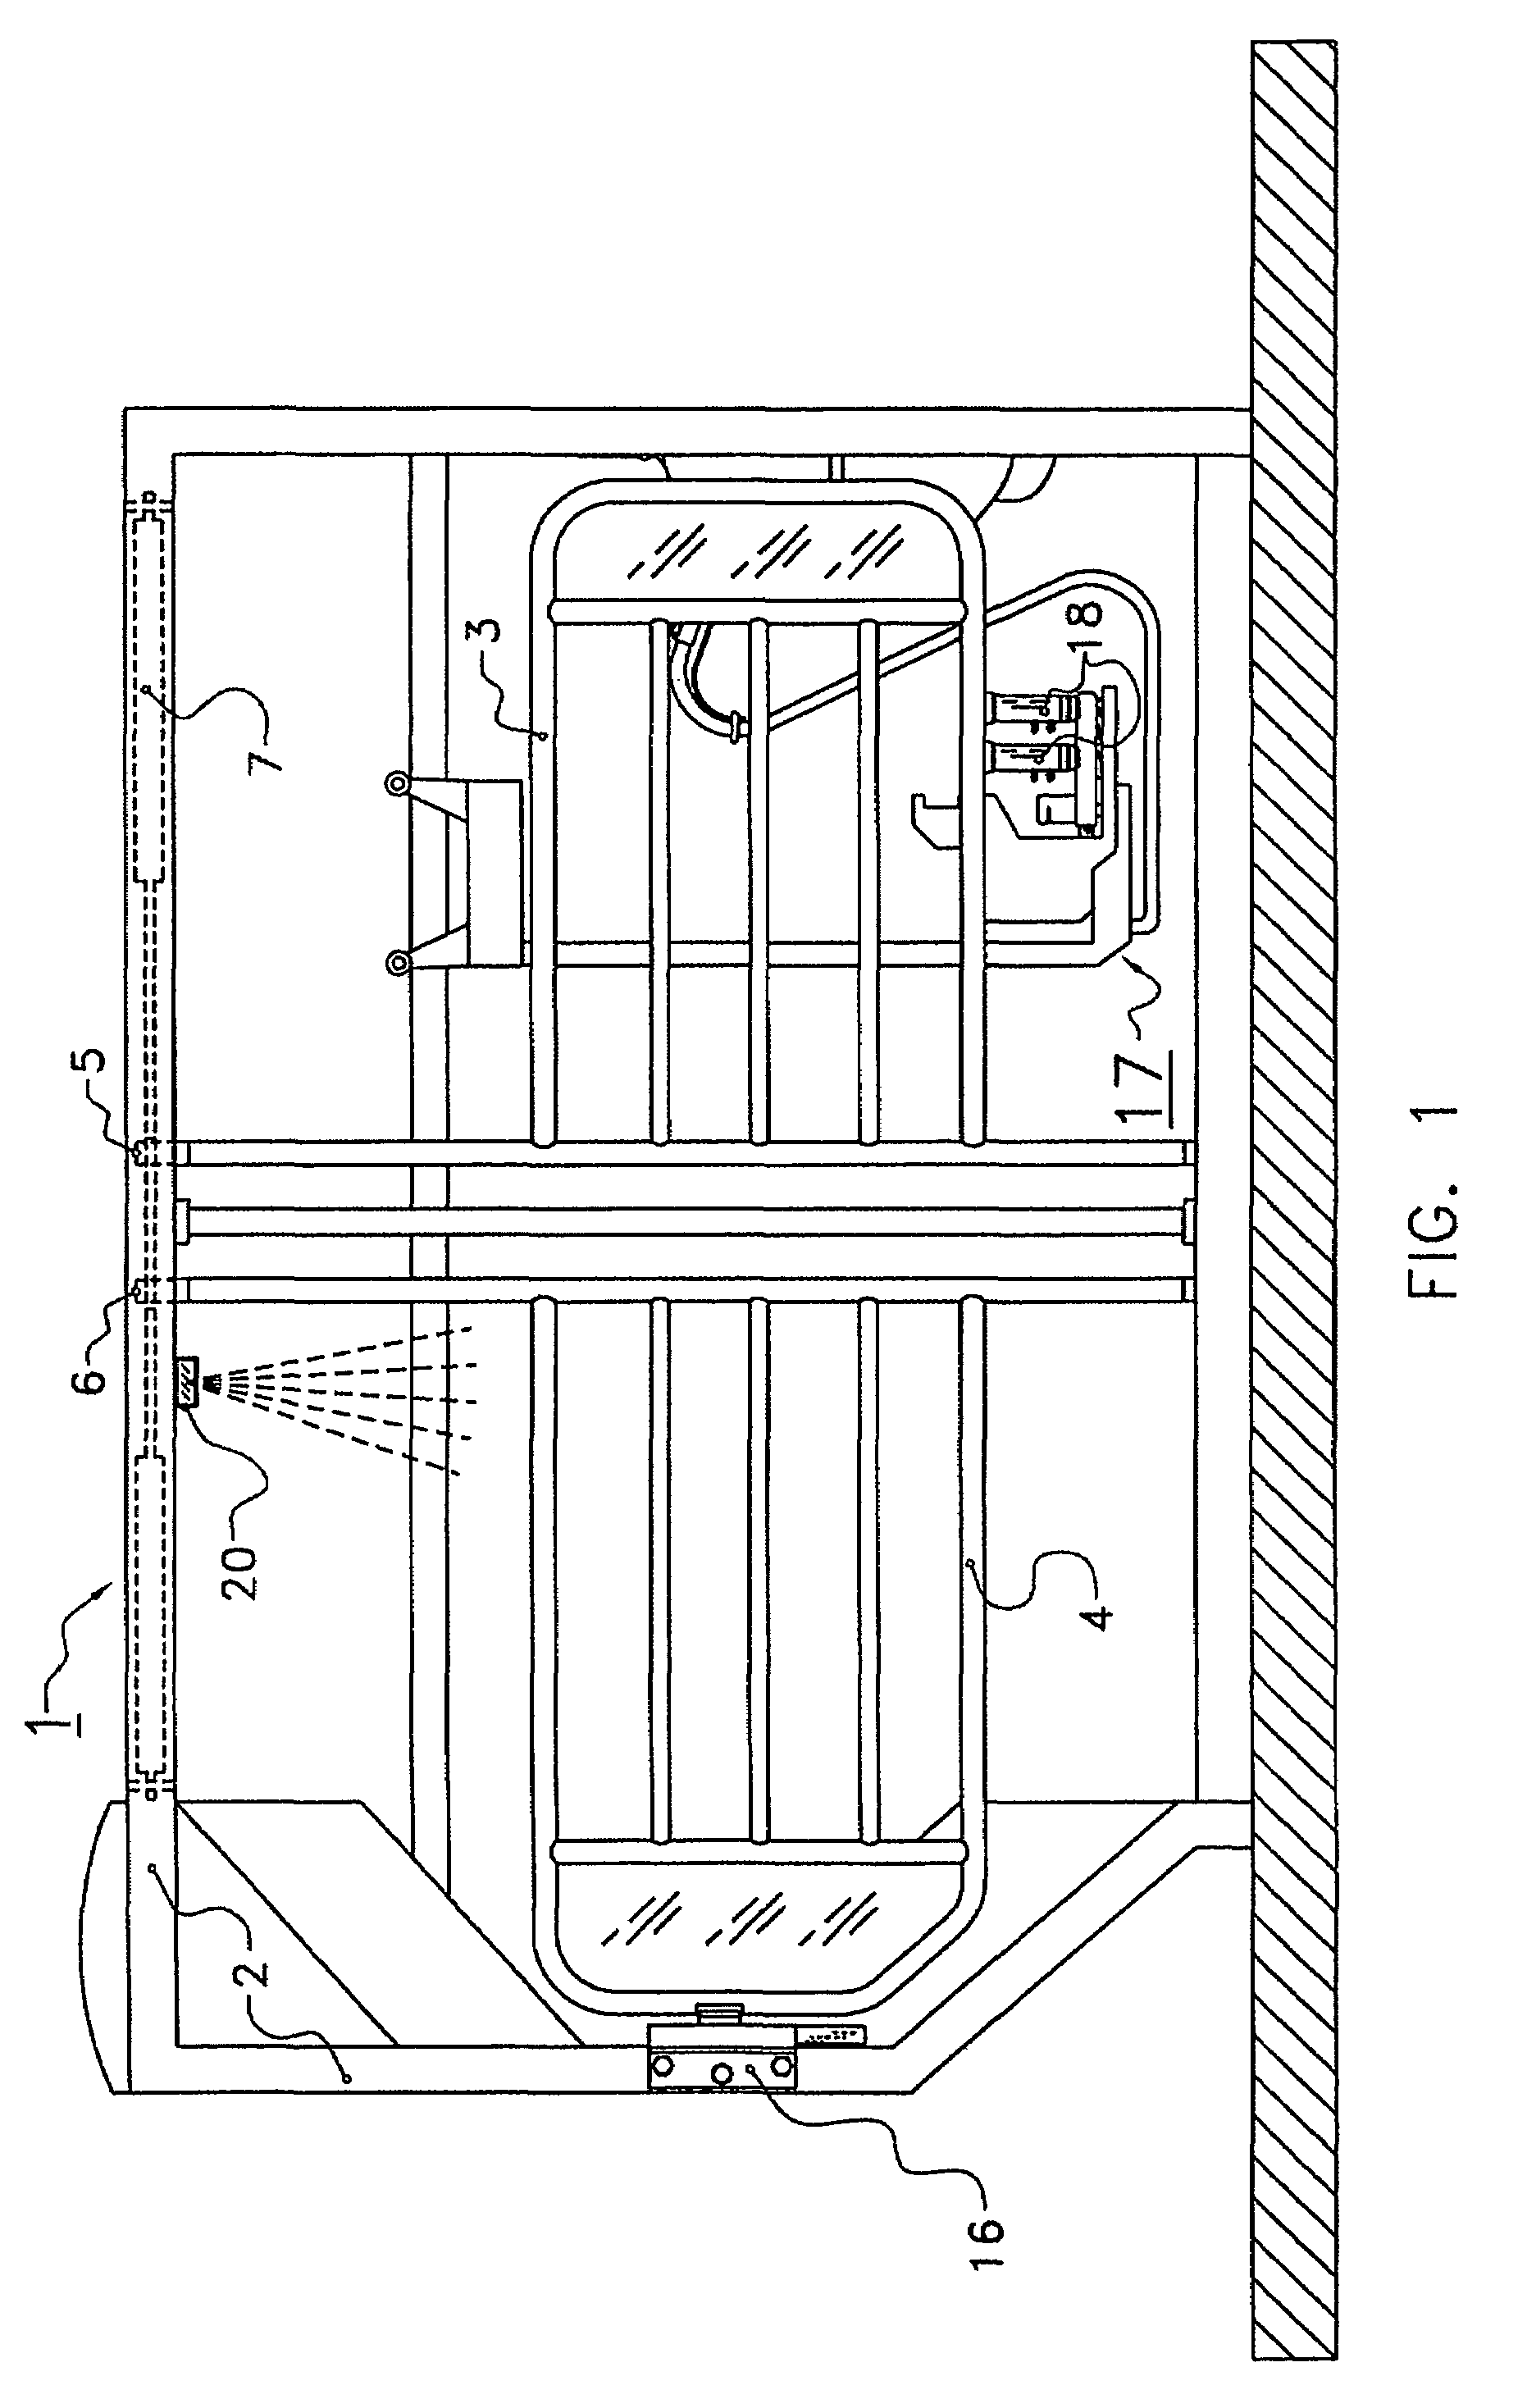 Device for managing animal traffic